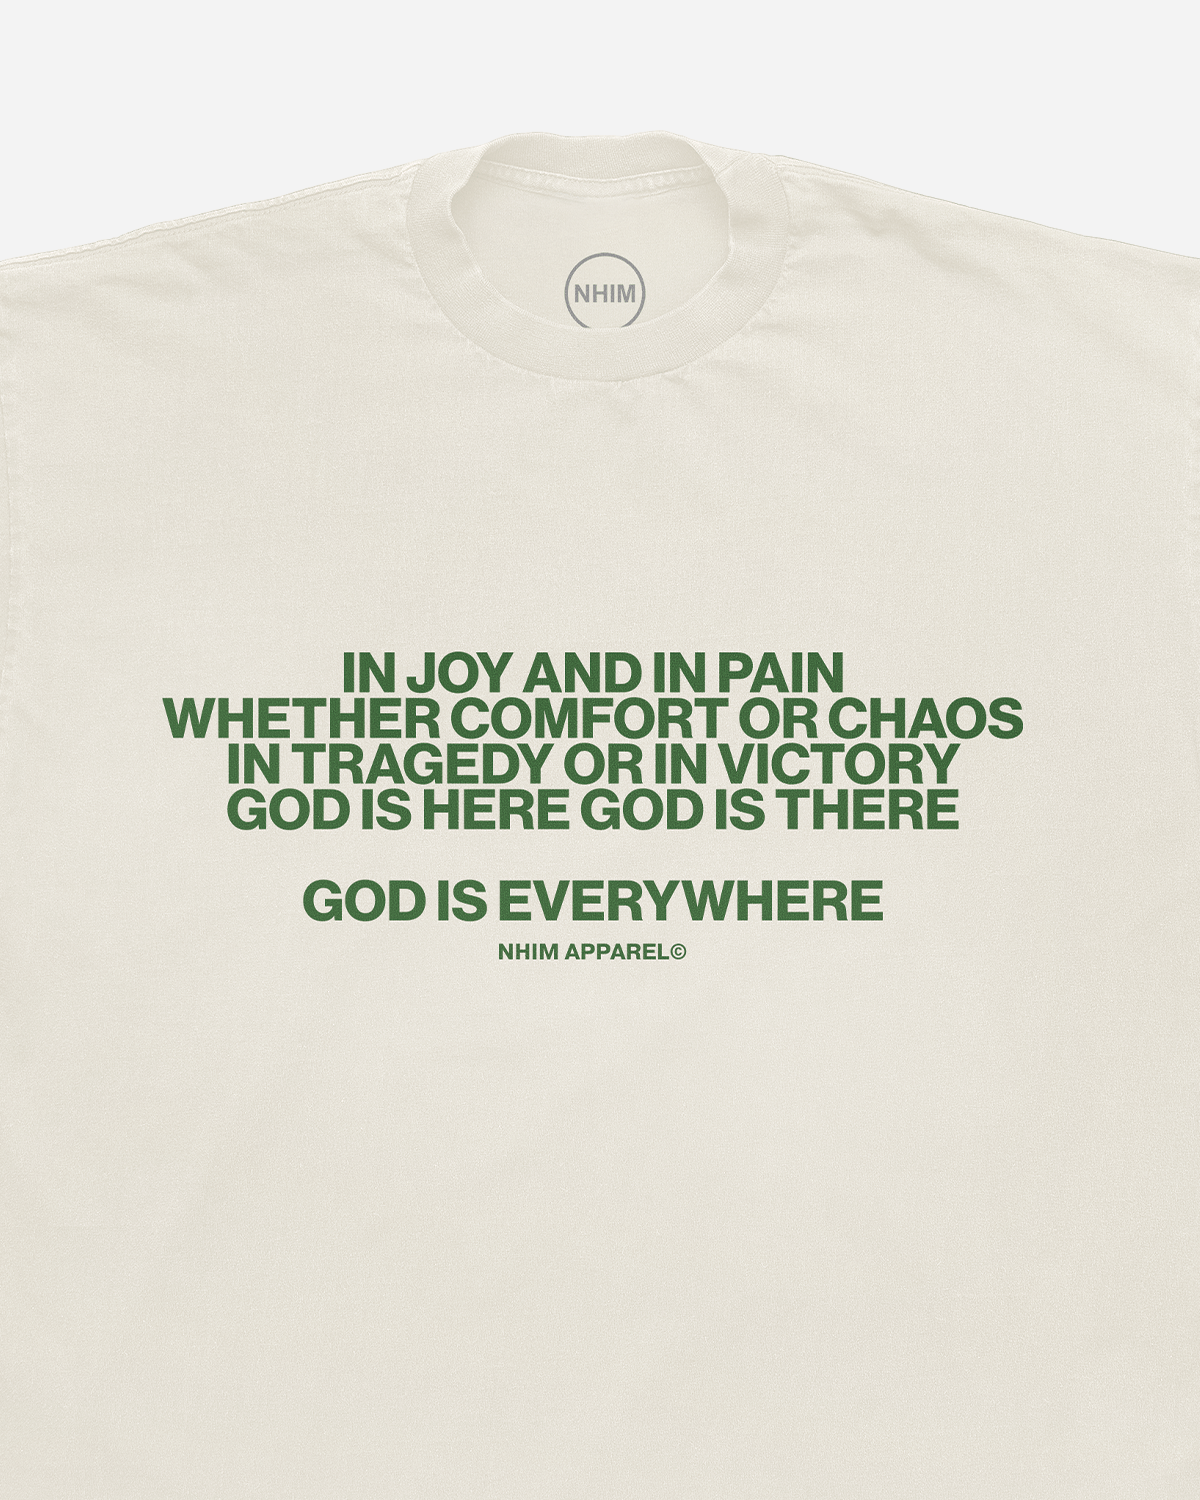 Christian t shirt. God is Everywhere. Made in USA. NHiM Apparel Christian Clothing Company. God is Here.